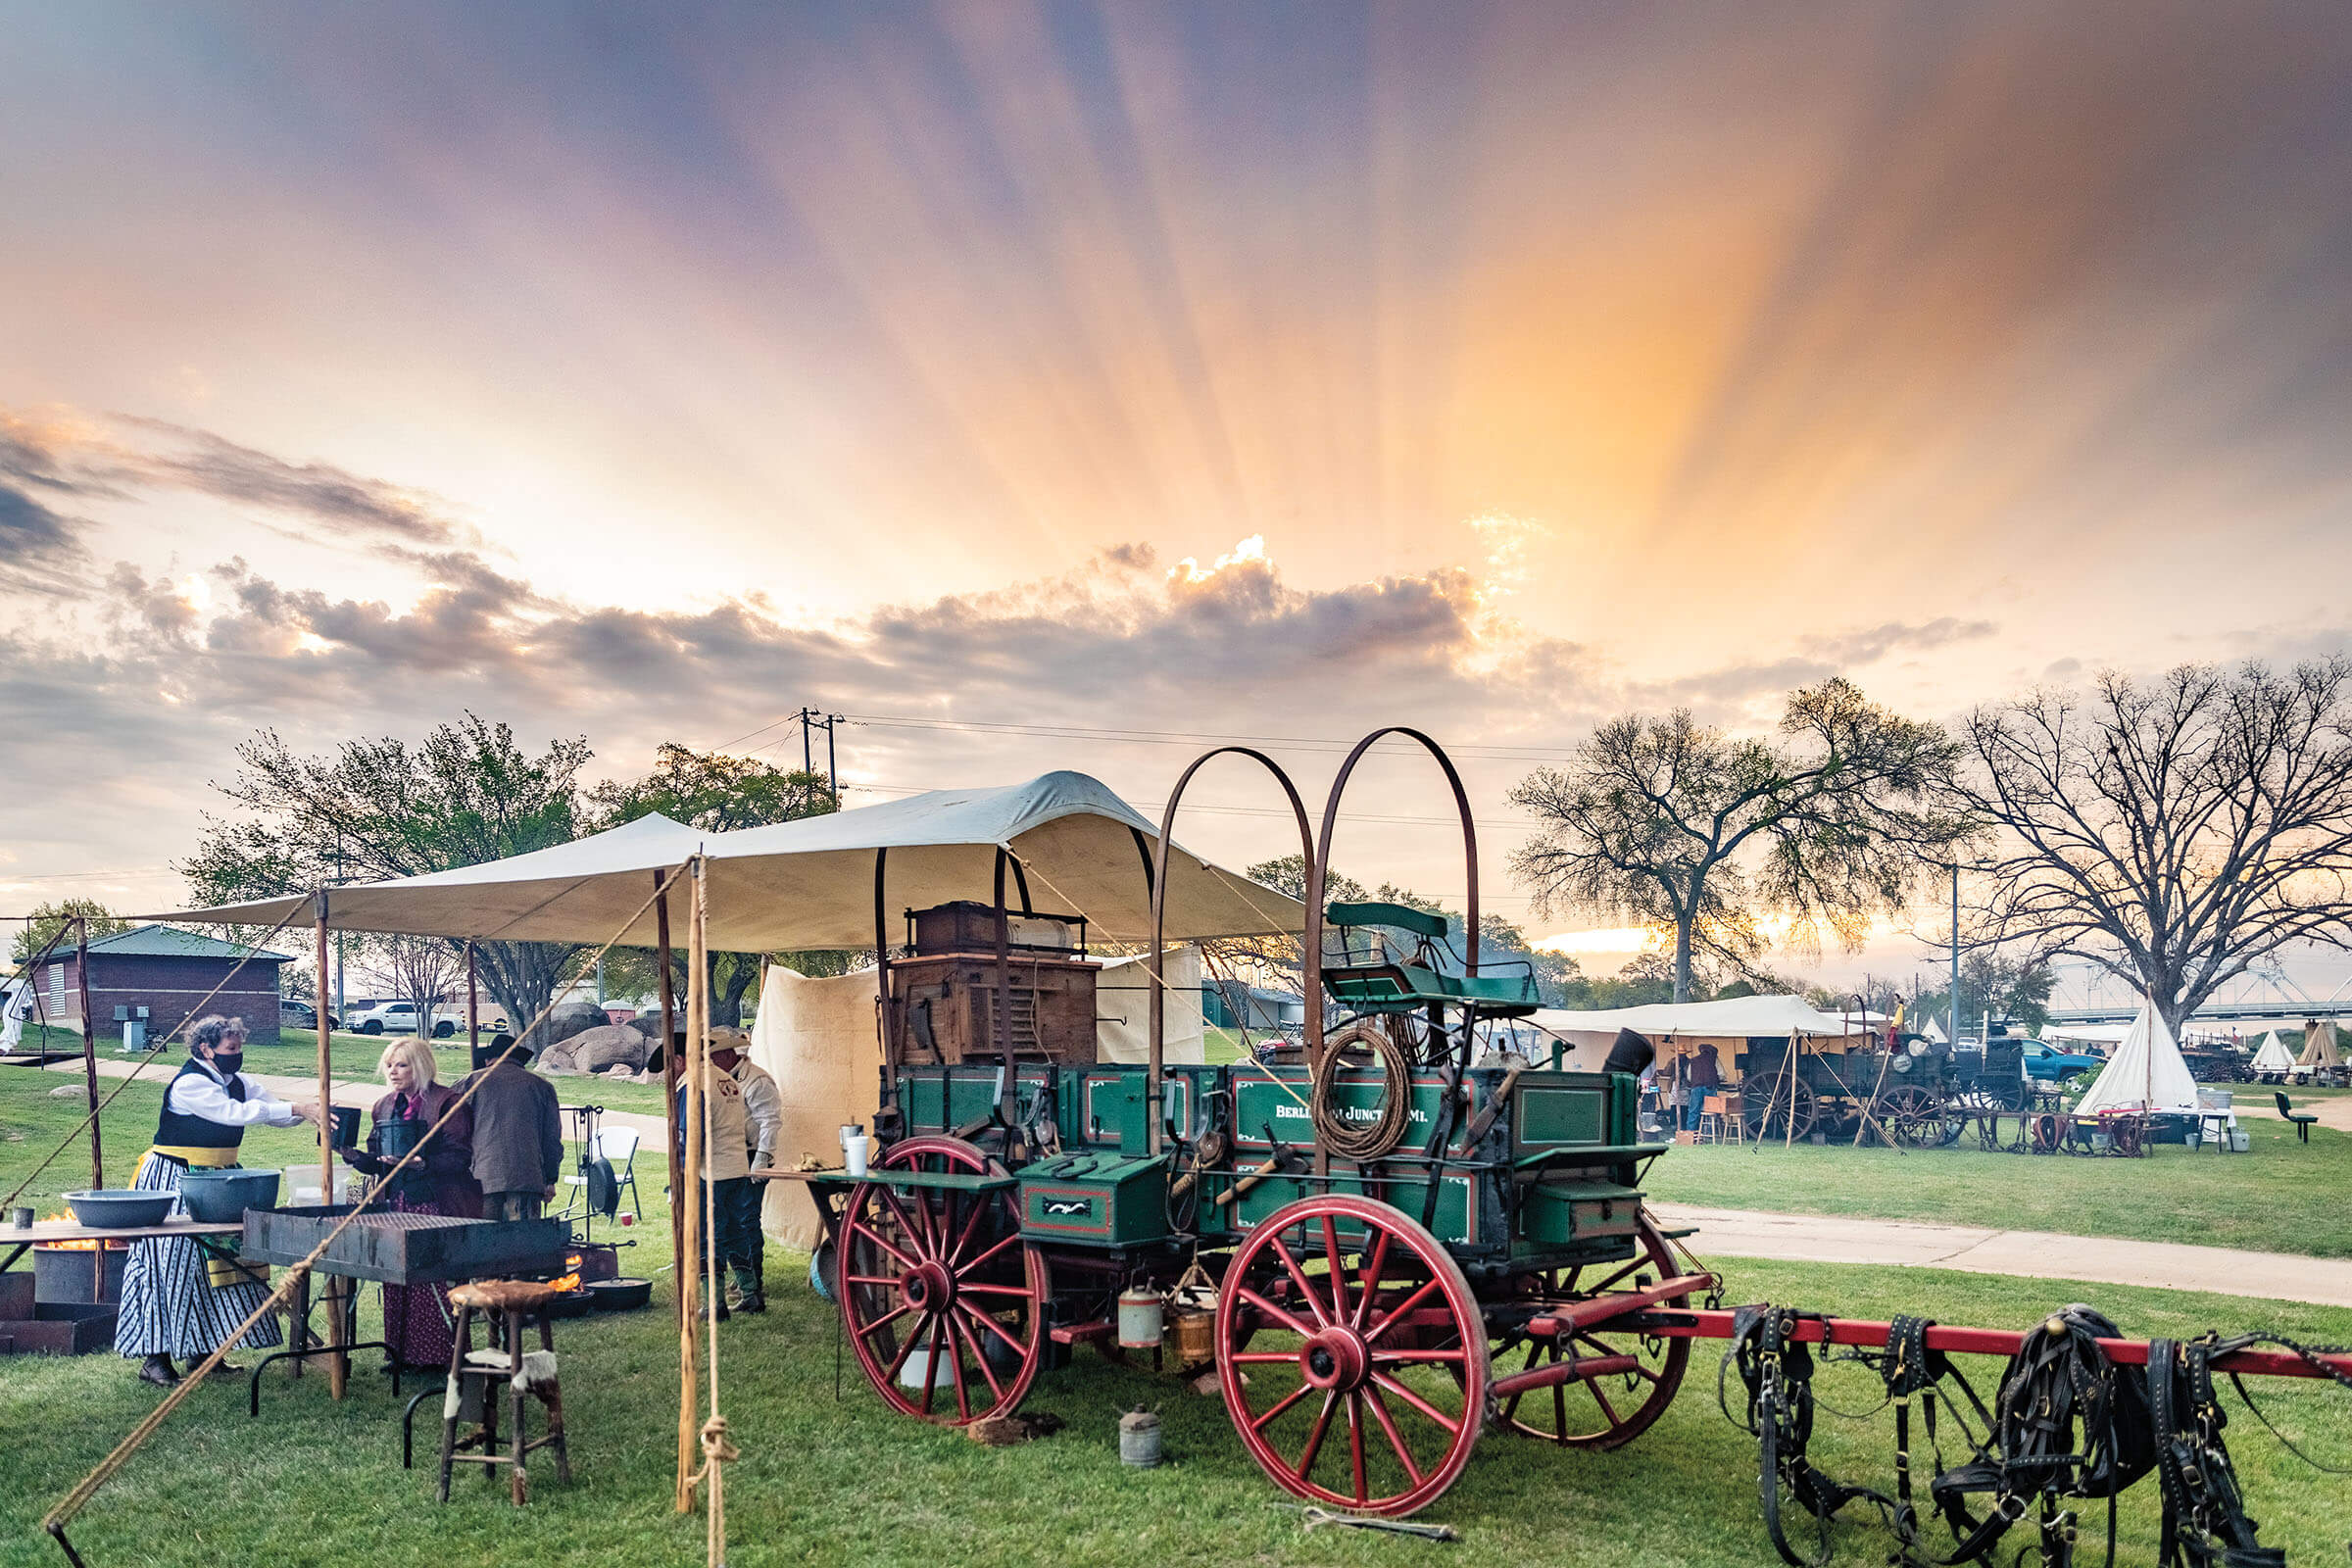 A golden sunrise behind a blue-green chuckwagon with a few people in front